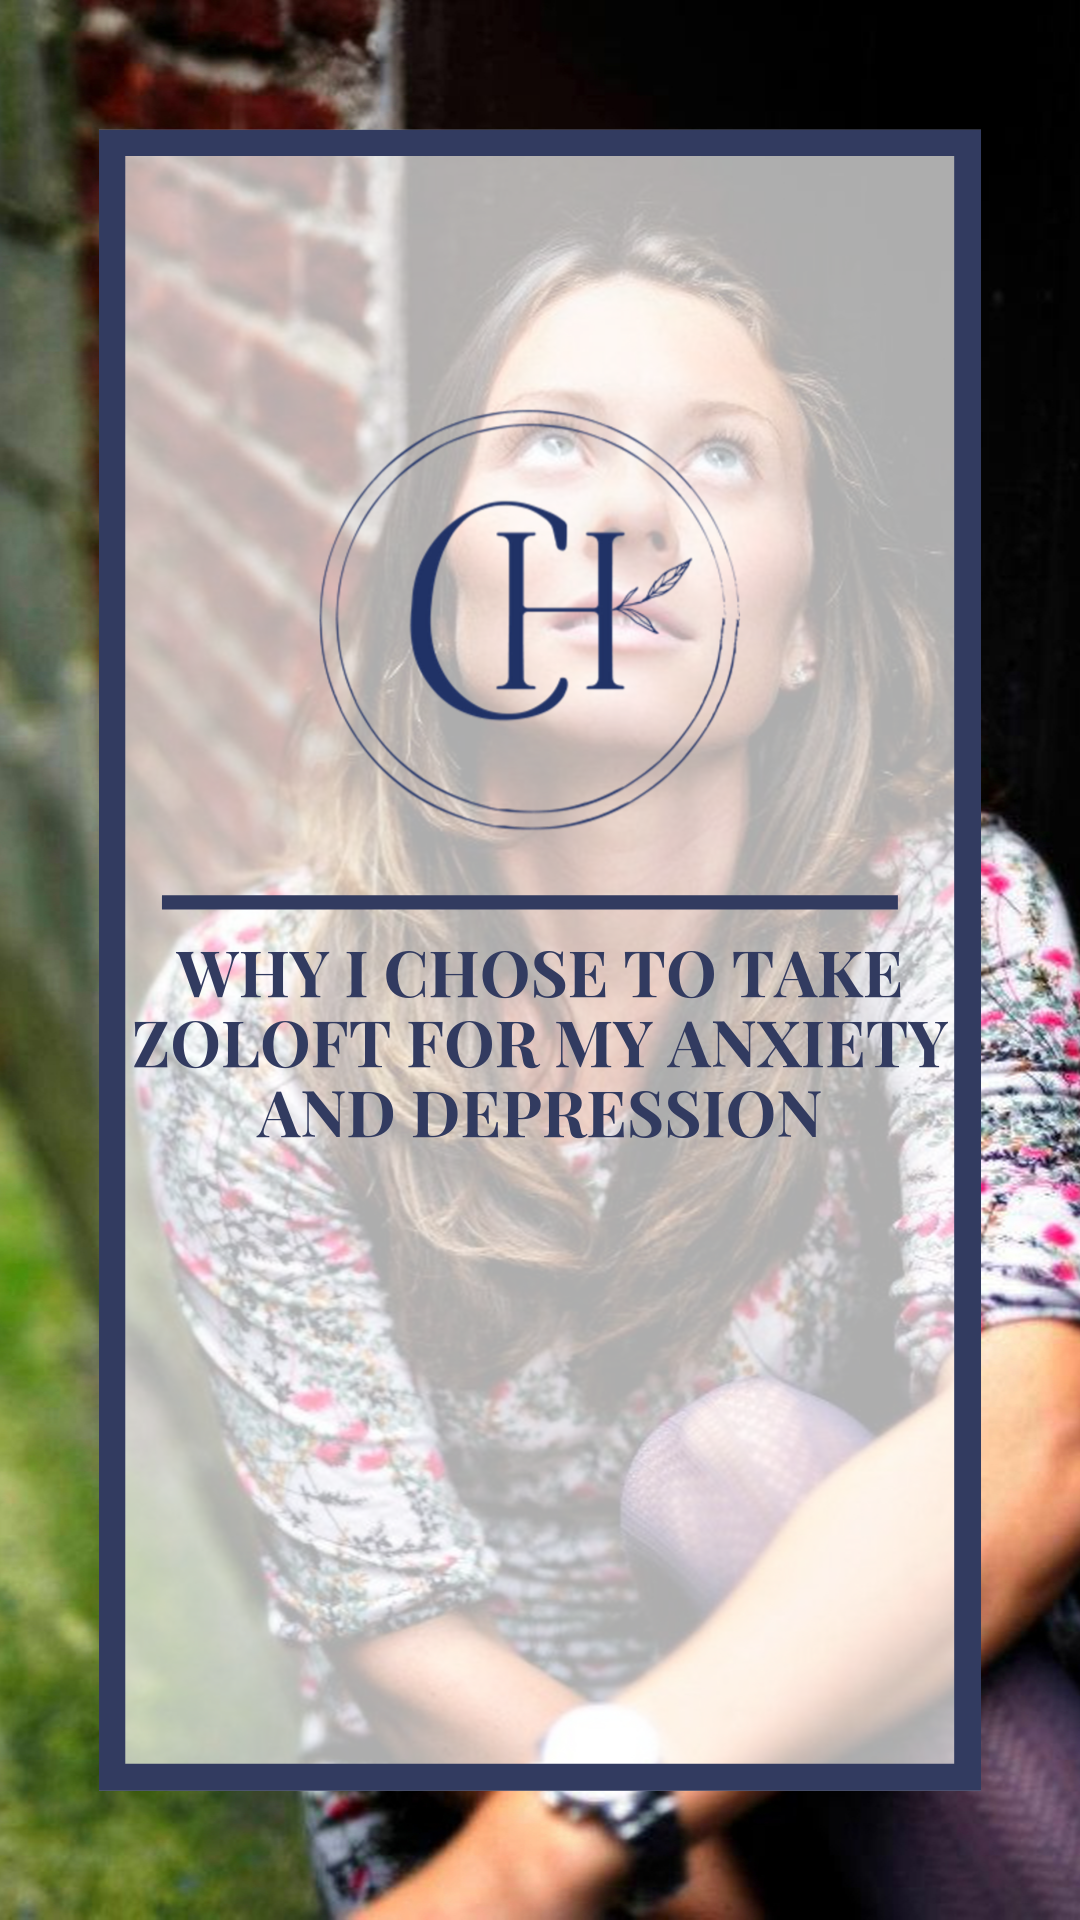 Zoloft for Anxiety and Depression